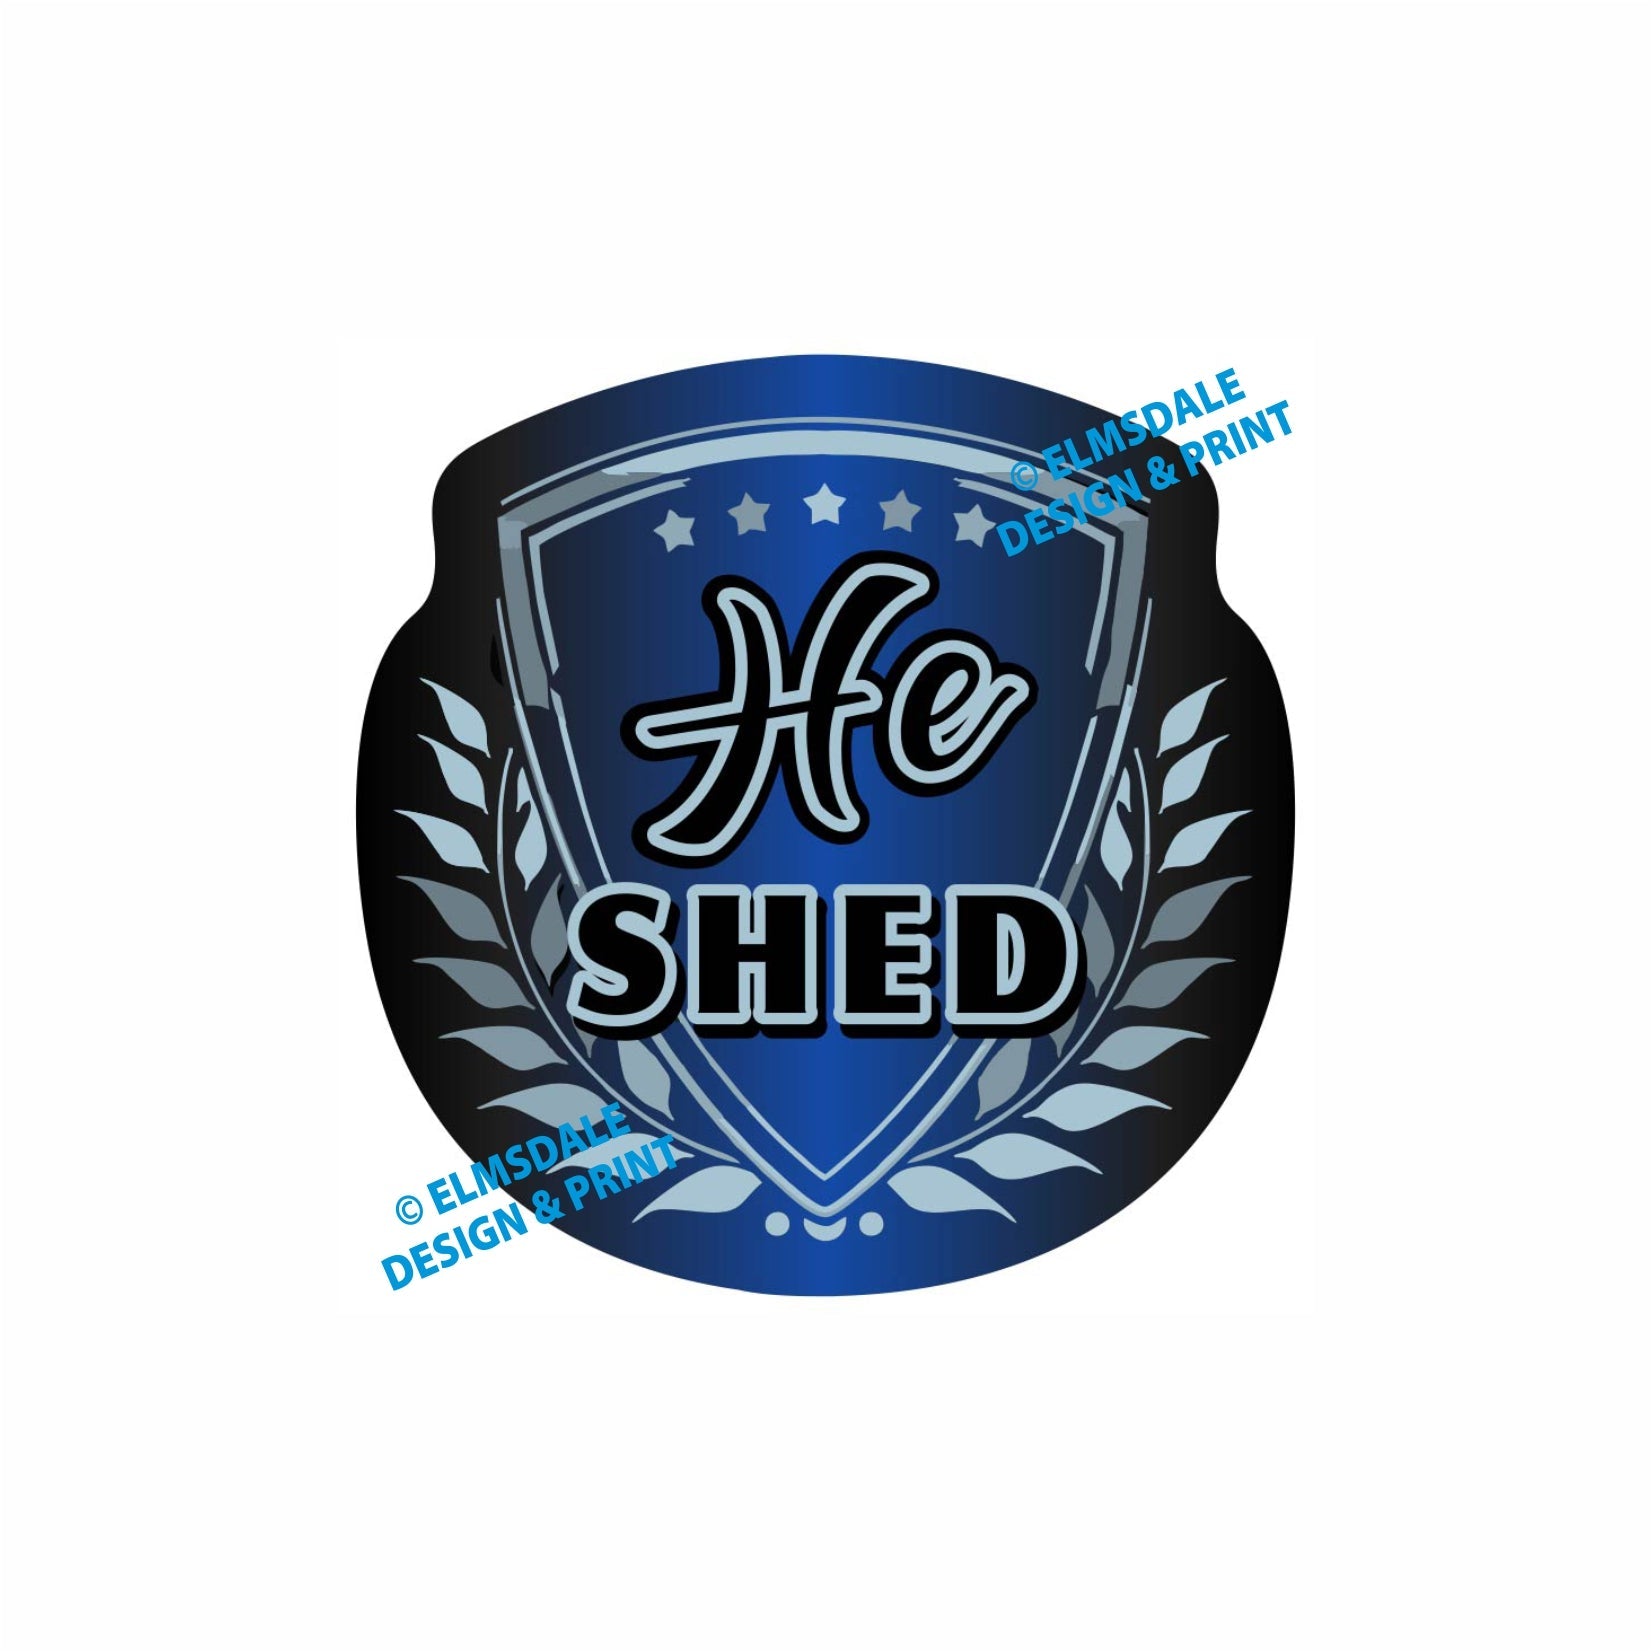 He Shed - Decal / 7.75’ x 7.75’ / Silver & Blue